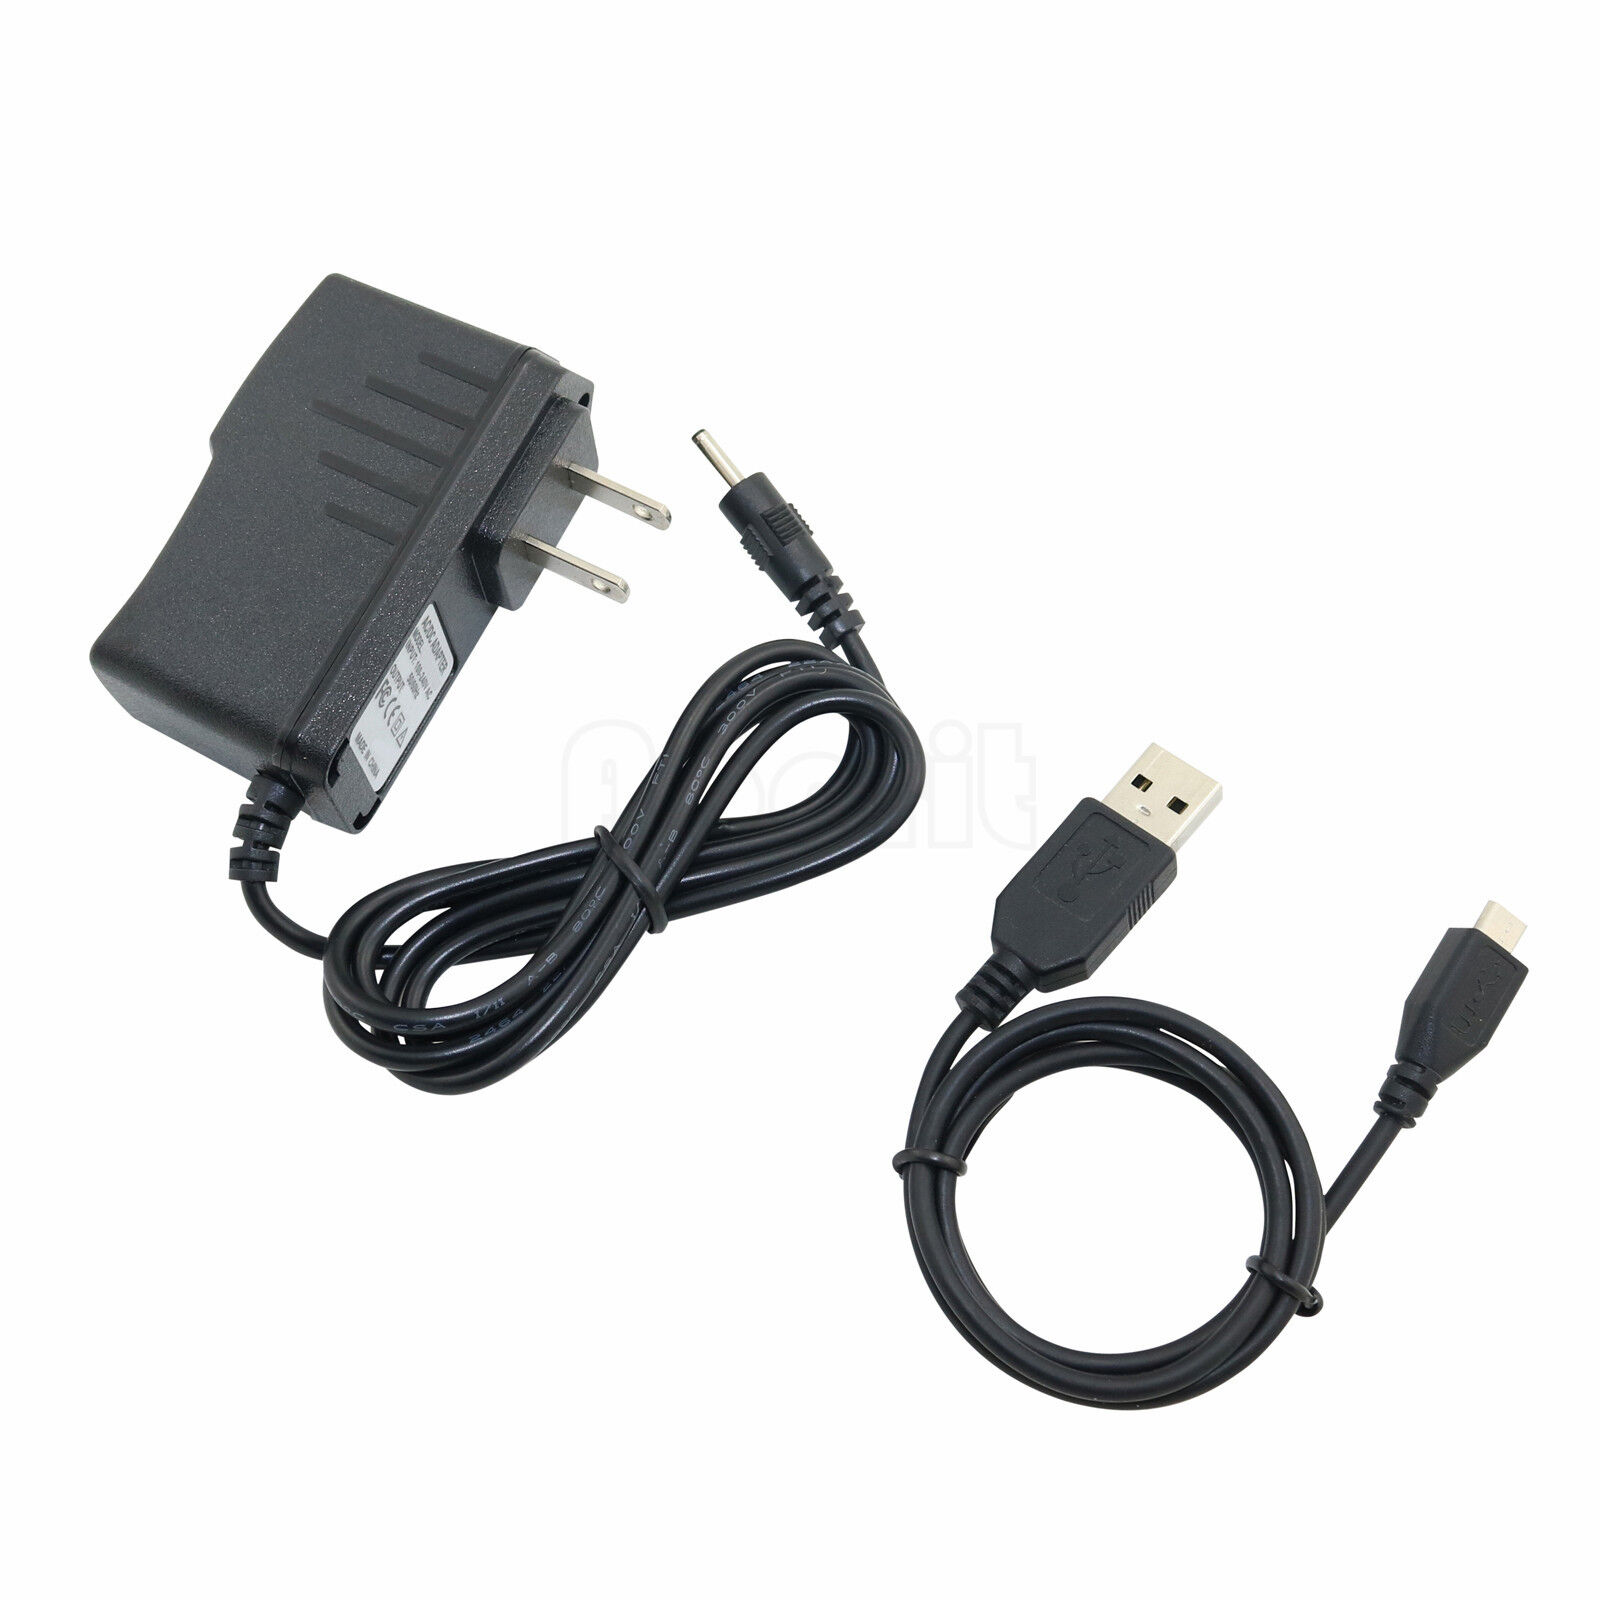 AC/DC Power Adapter Charger + USB Cord for Pandigital Novel PRD07T20WBL7 Tablet AC/DC Power Adapter Charger + USB Cord